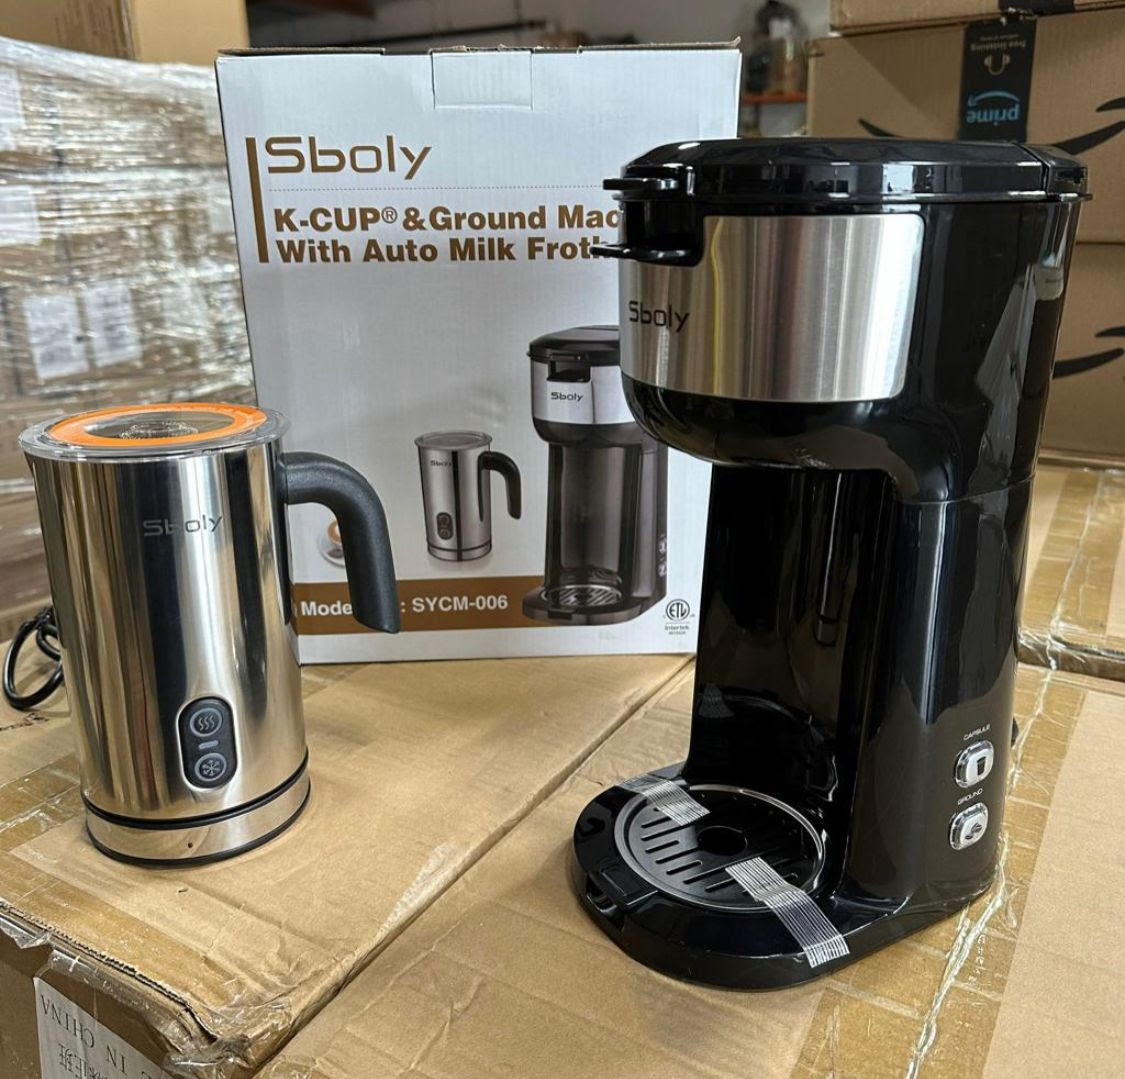 Sboly K-Cup & Ground Machine with Auto Milk Frother. 1000 units. 